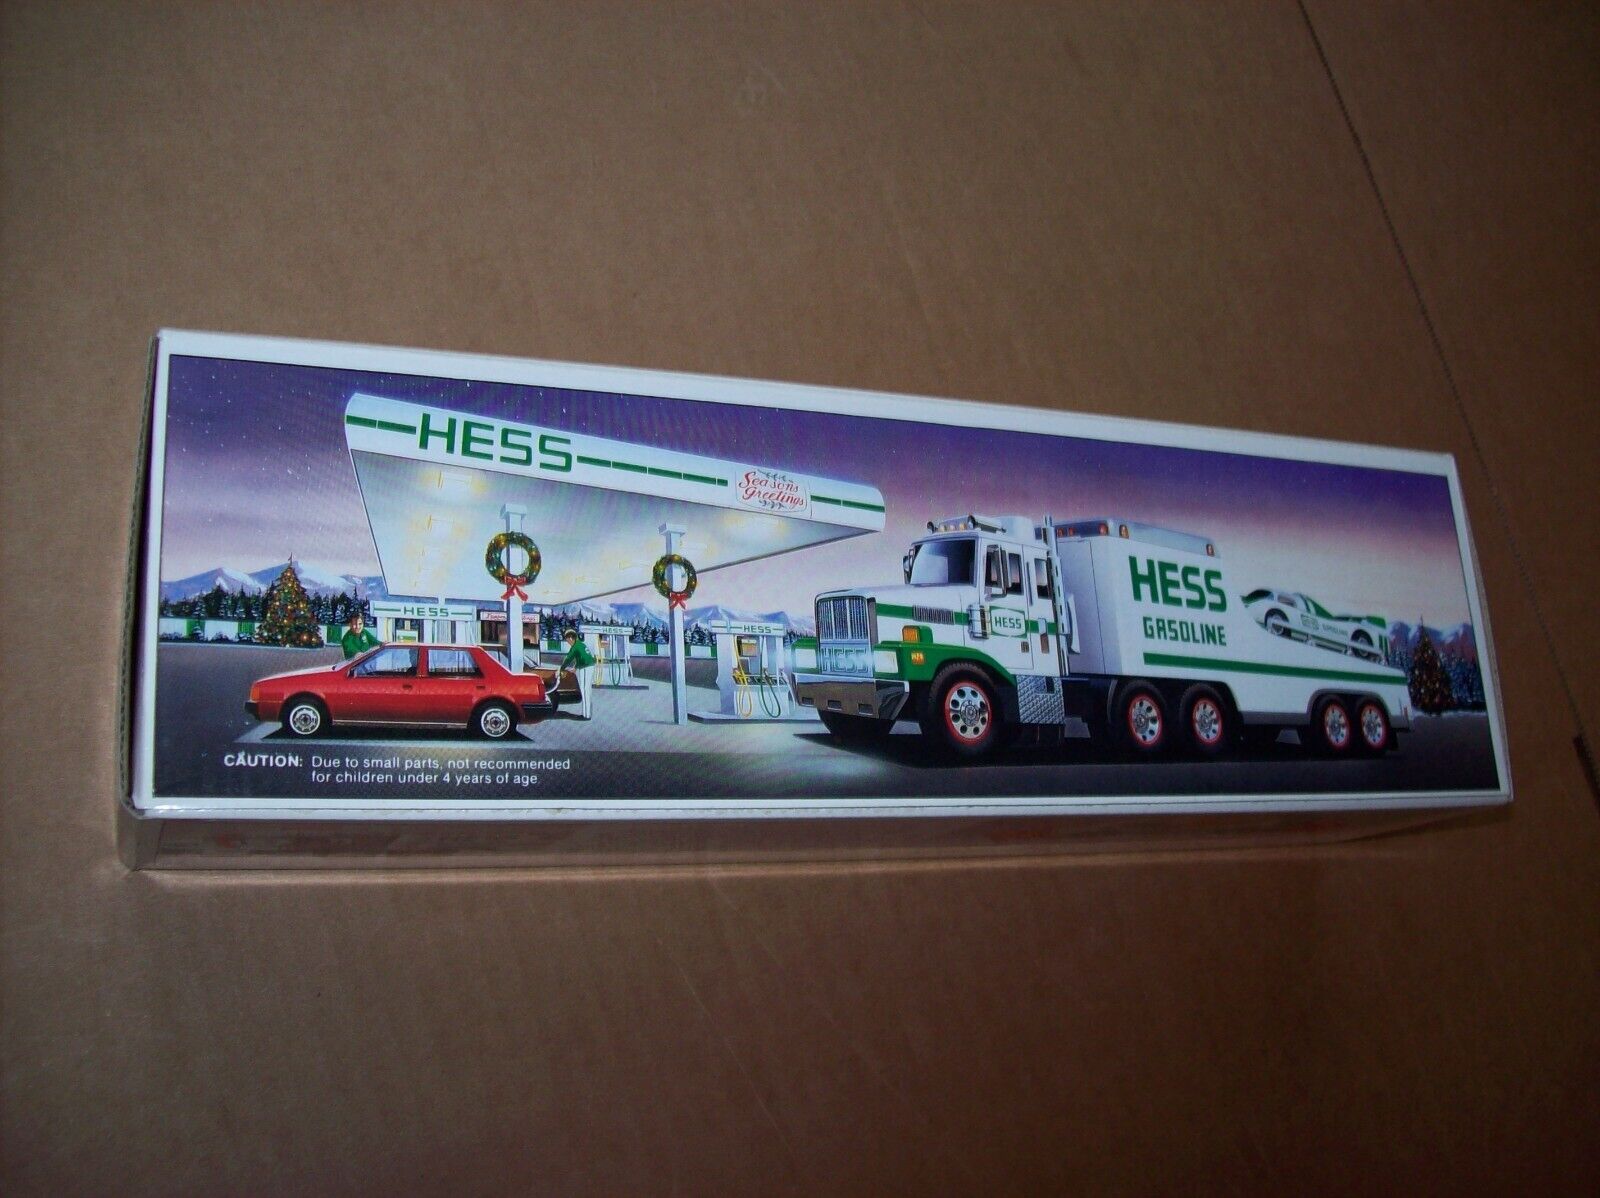 Vintage 1988 Hess Toy Truck and Racer BRAND NEW IN THE BOX removed to check only